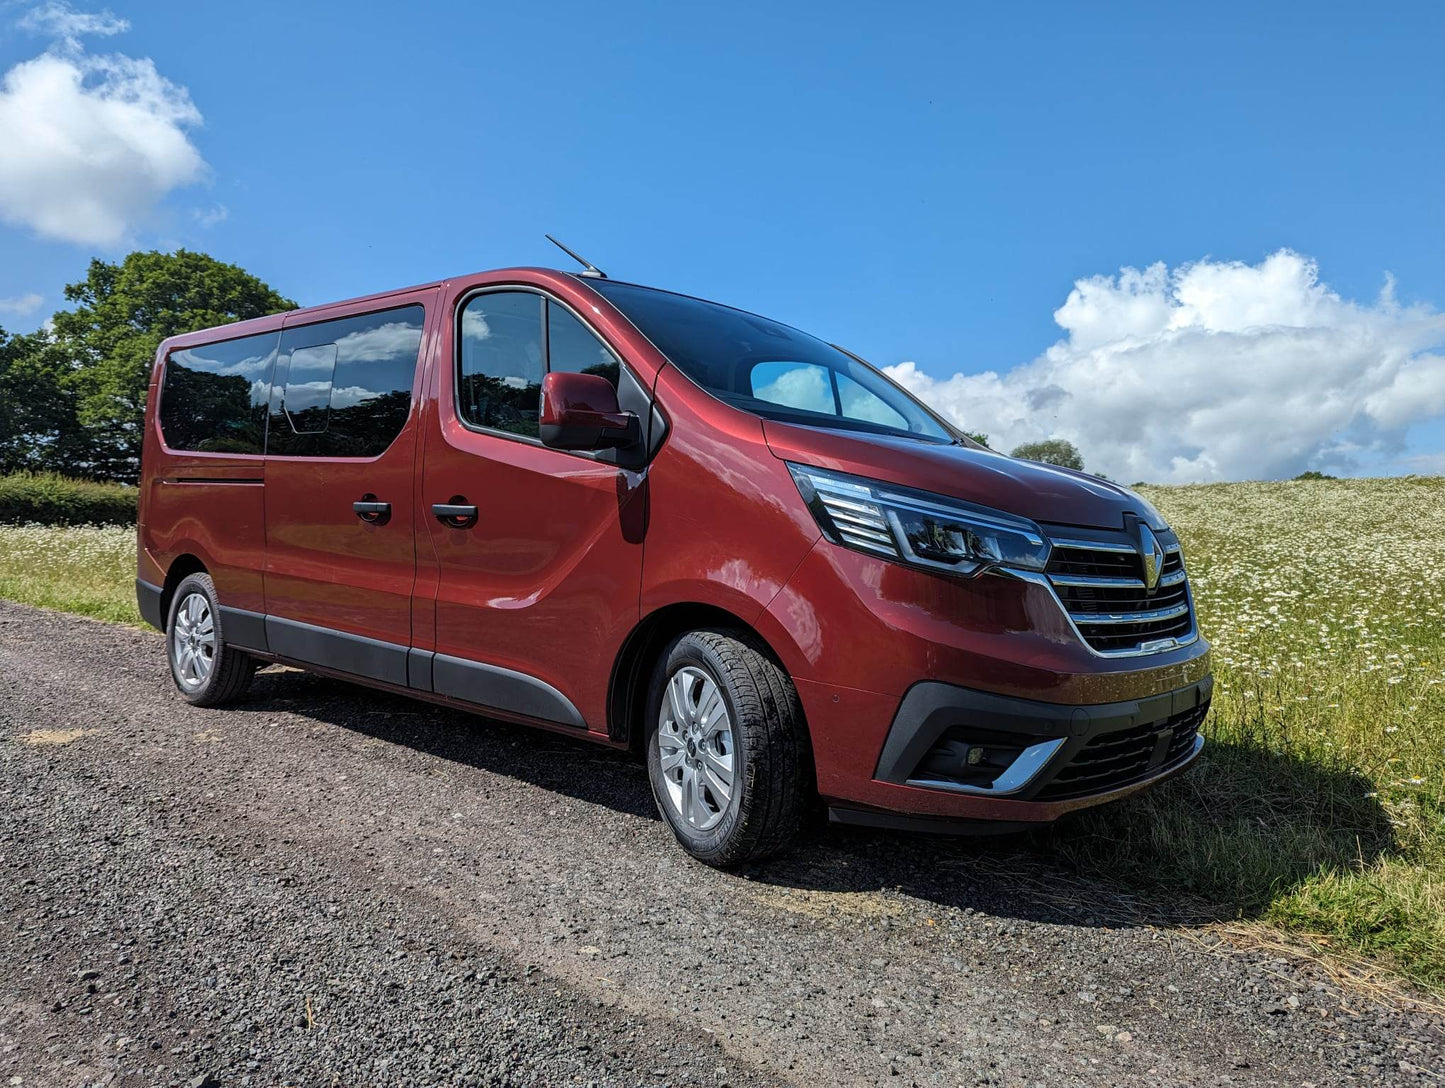 IN STOCK NOW - Brand New Renault Trafic in Carmin Red Mamble available